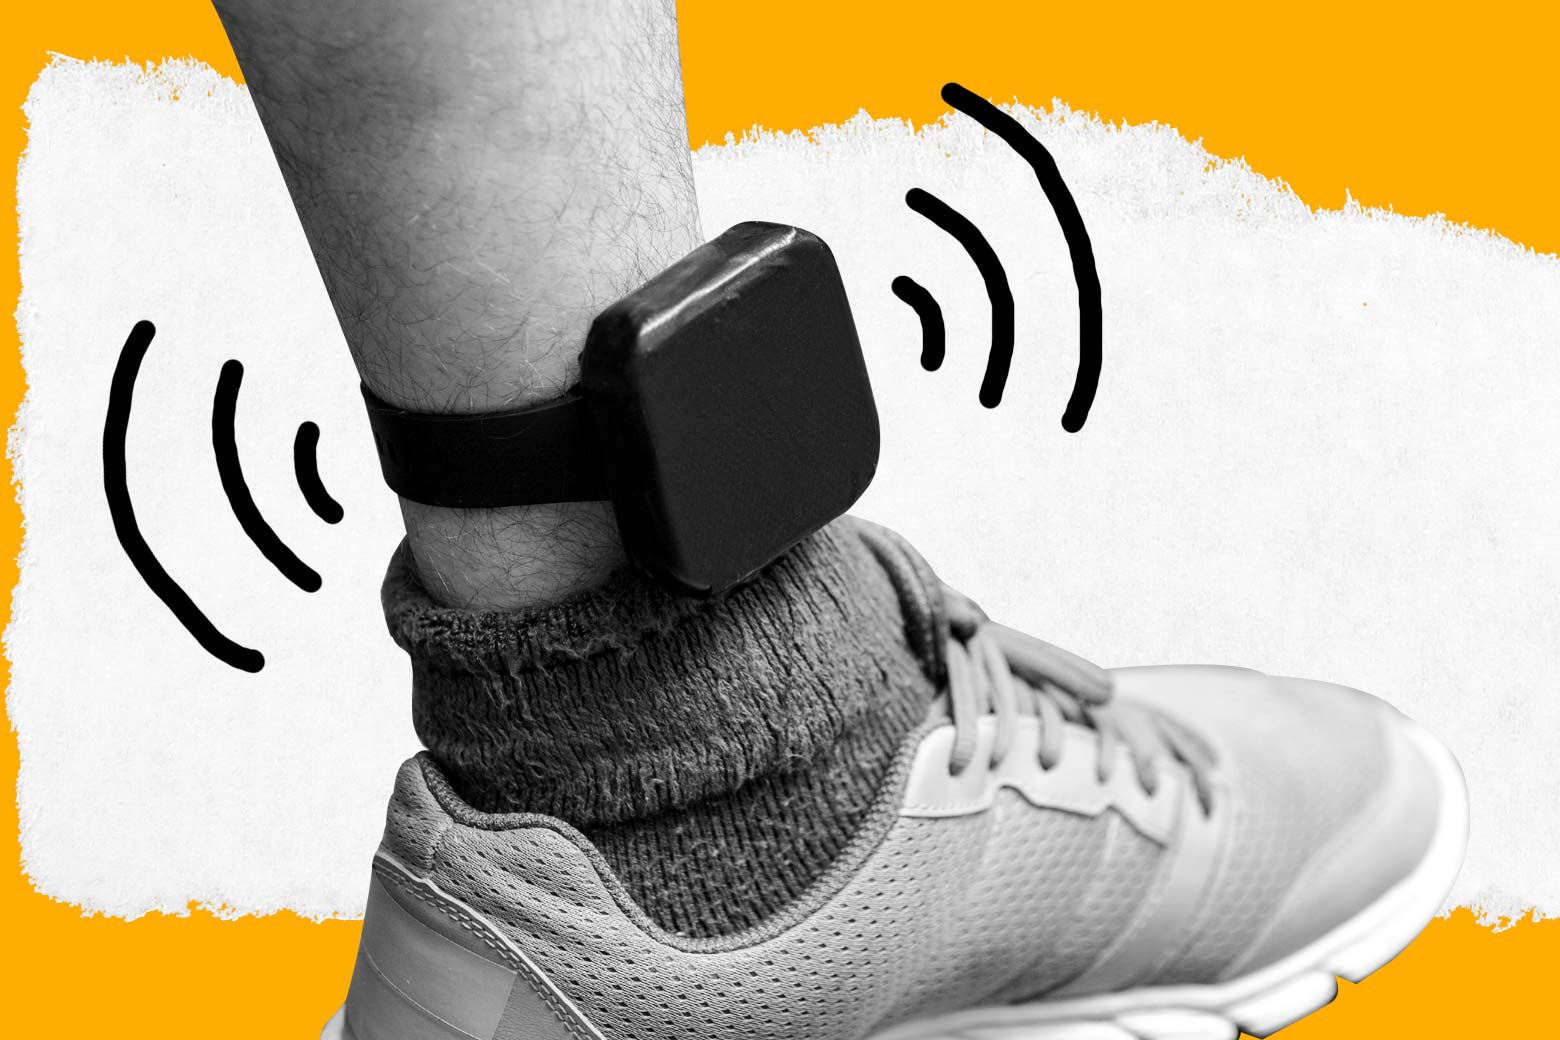 Enhanced ankle monitors raise questions about privacy and dignity